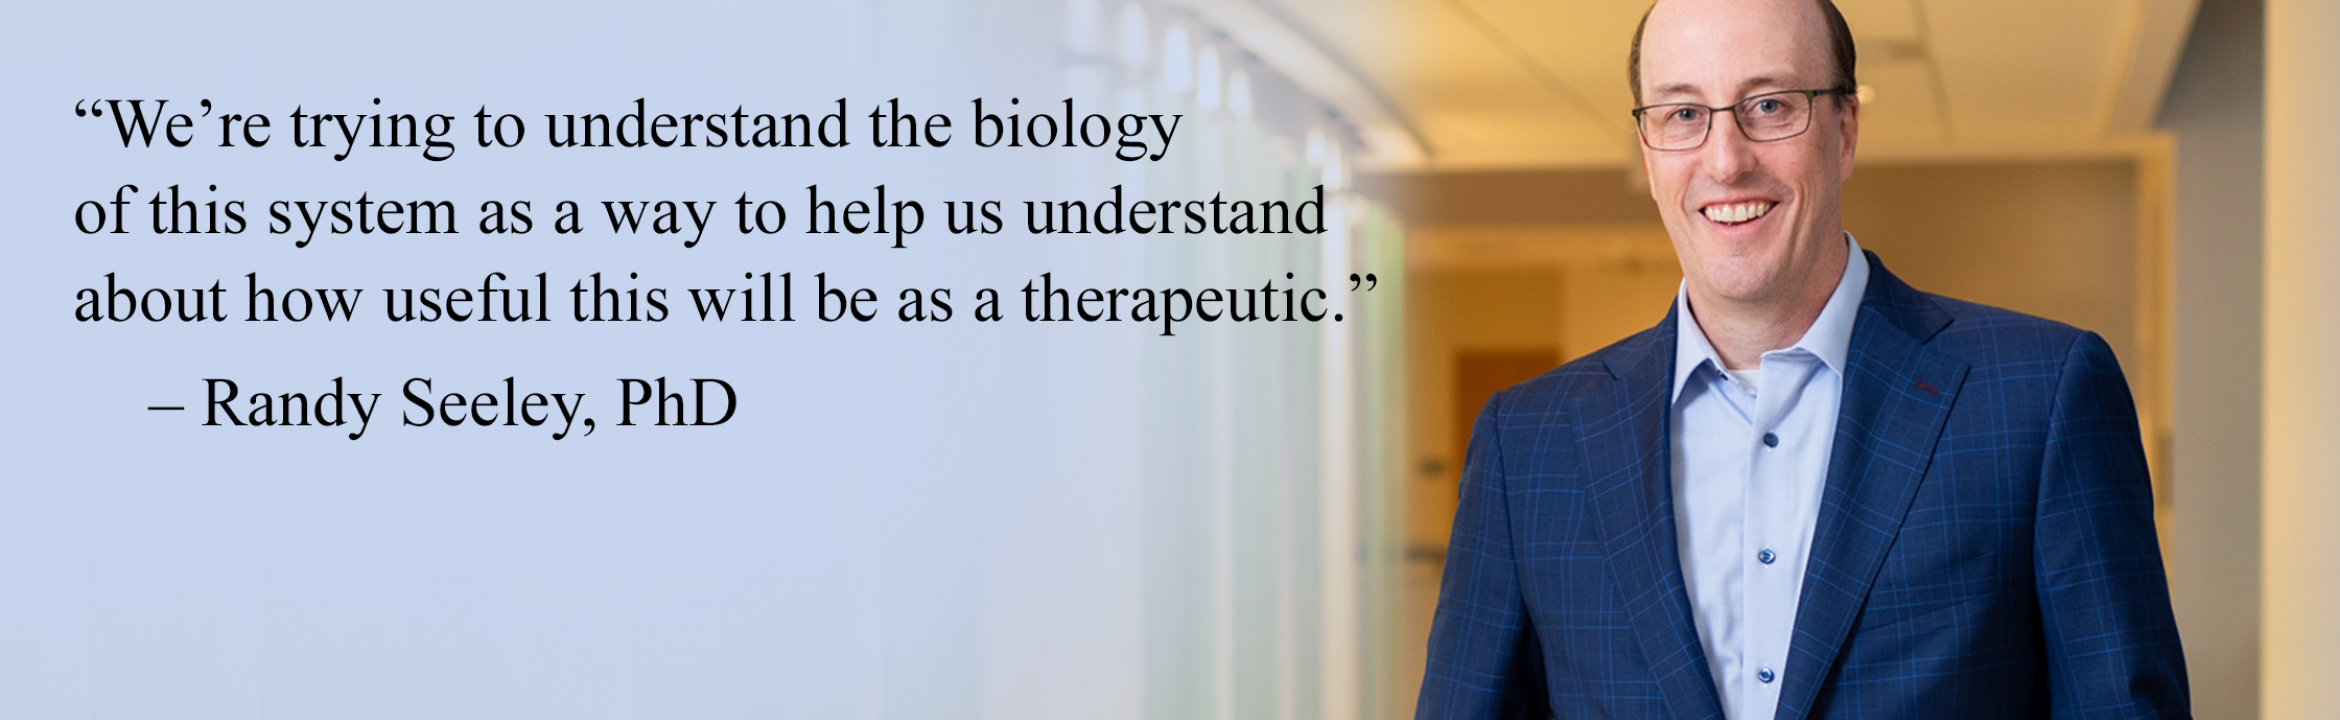 "We're trying to understand the biology of this system as a way to help us understand about how useful this will be as a therapeutic." – Randy Seeley, PhD